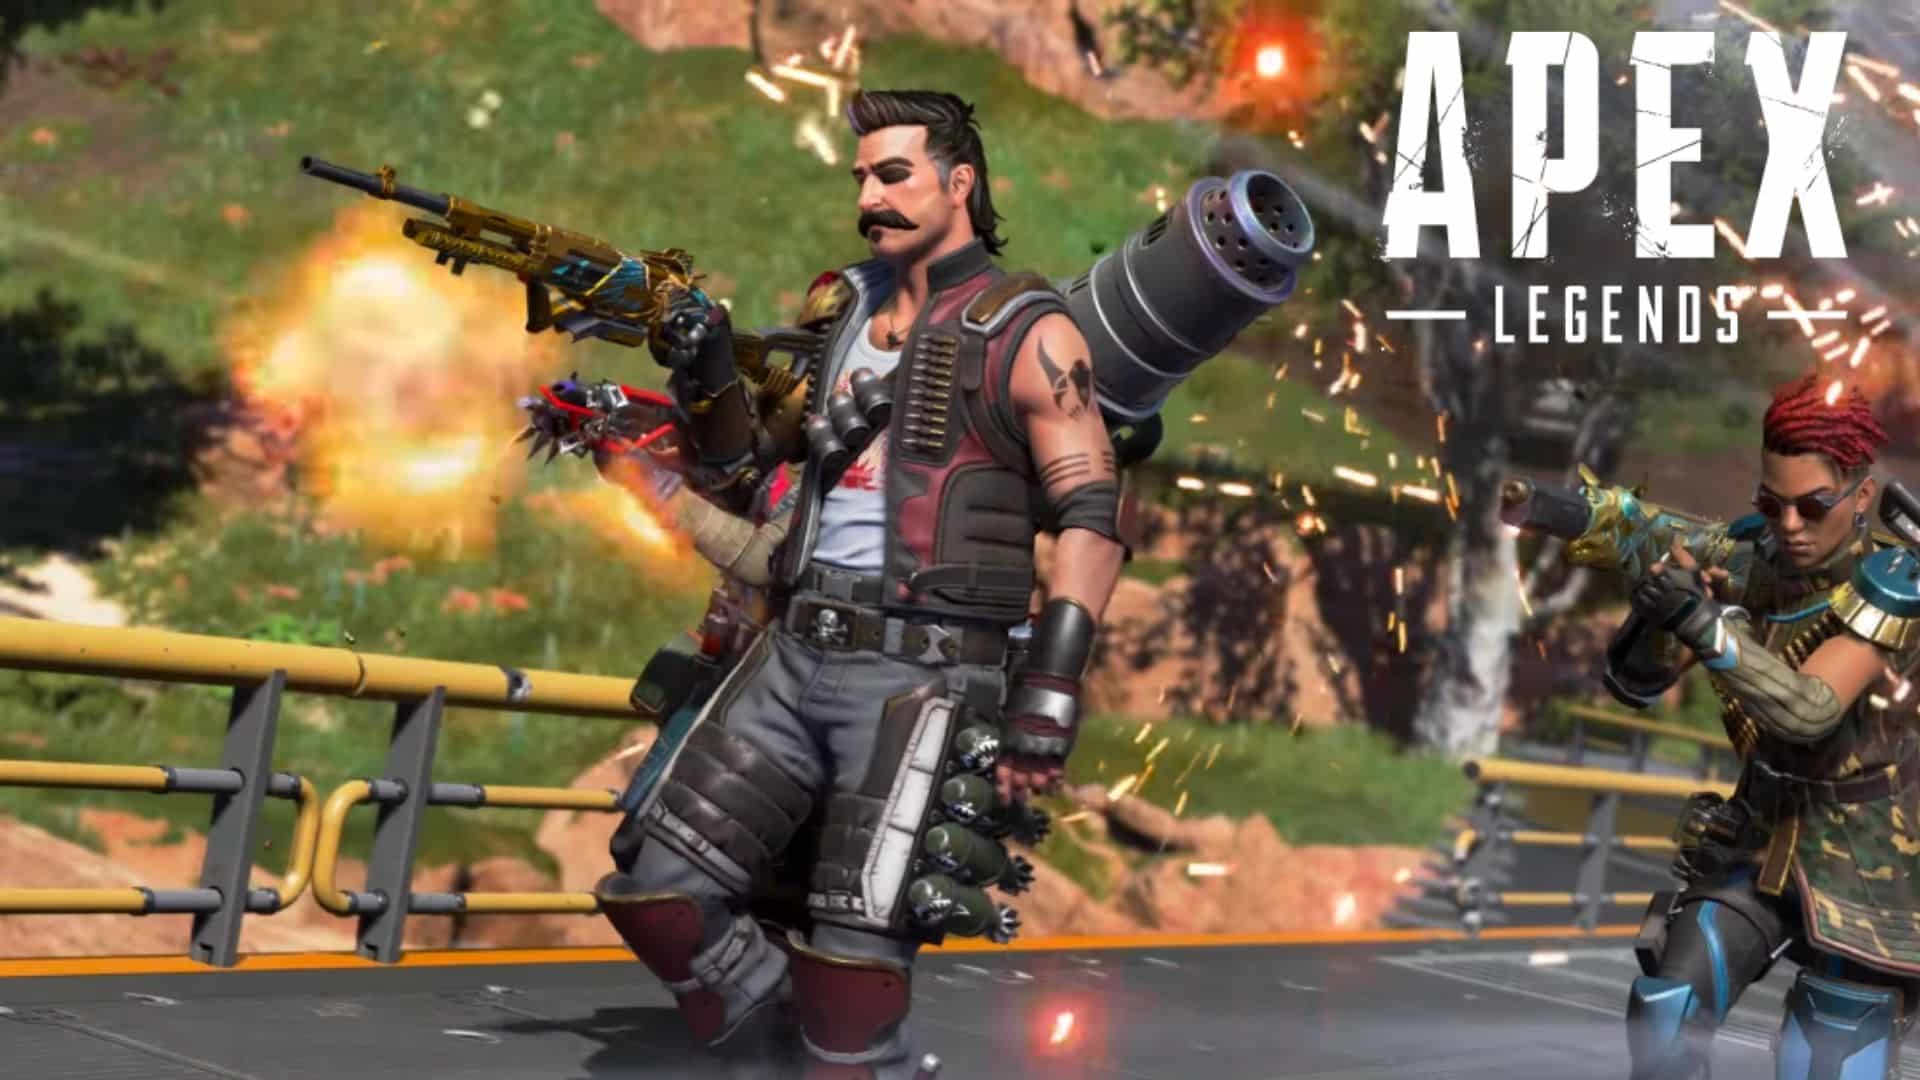 Apex Legends Fuse holding 30-30 repeater with other characters shooting